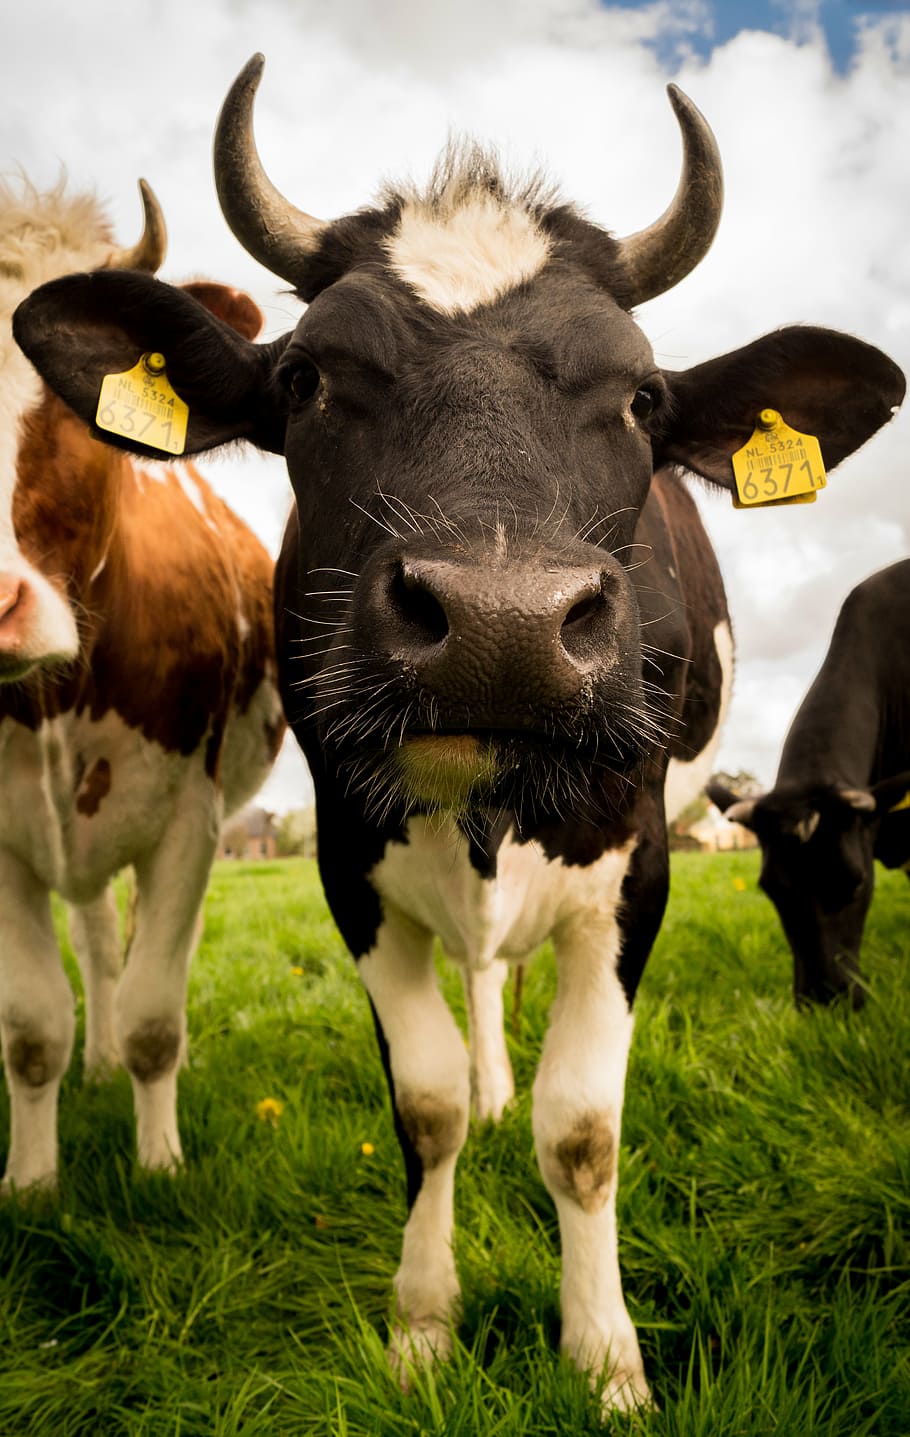 close-up photo, black, cow, white, cattle, cows, animals, farm, meadow, grass